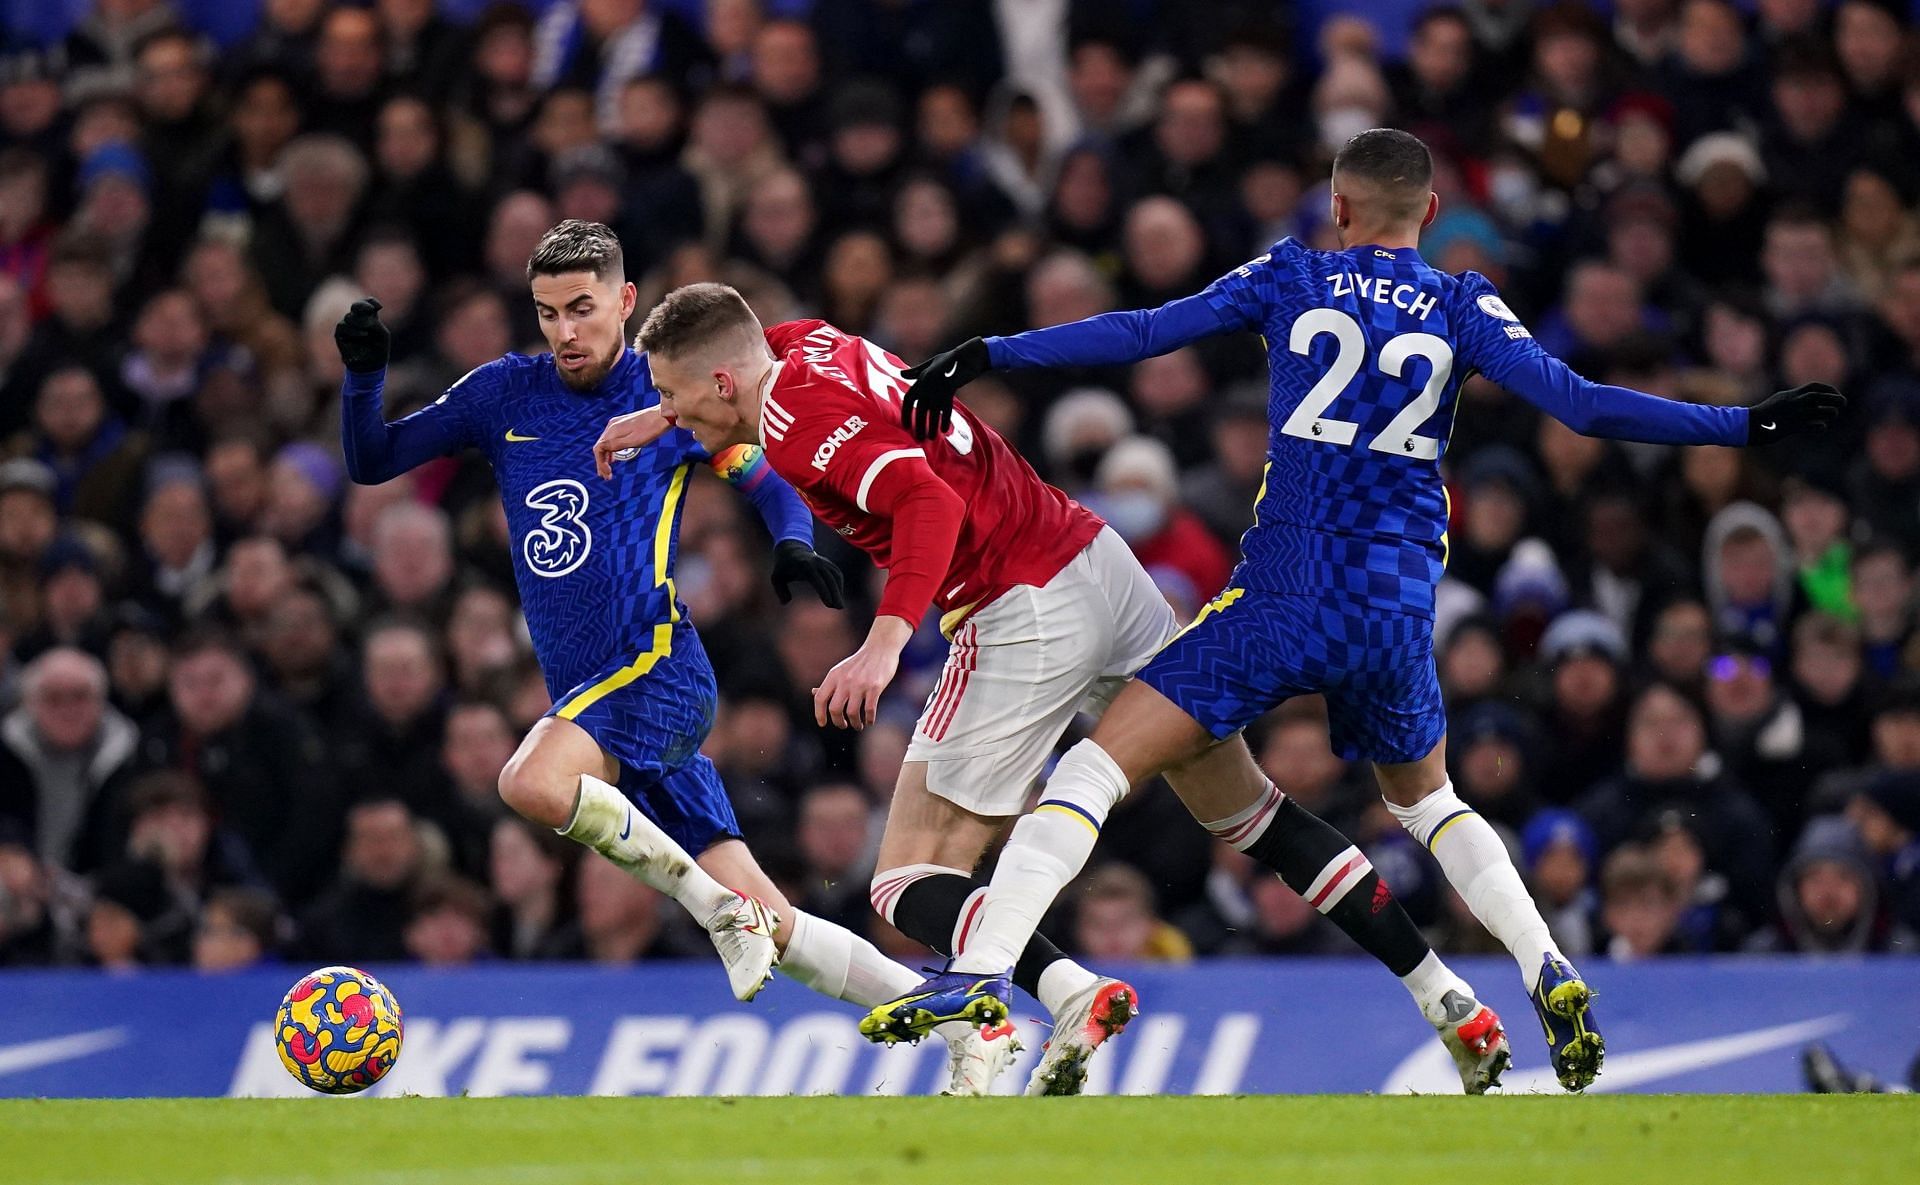 Chelsea shared the spoils with Manchester United in the Premier League